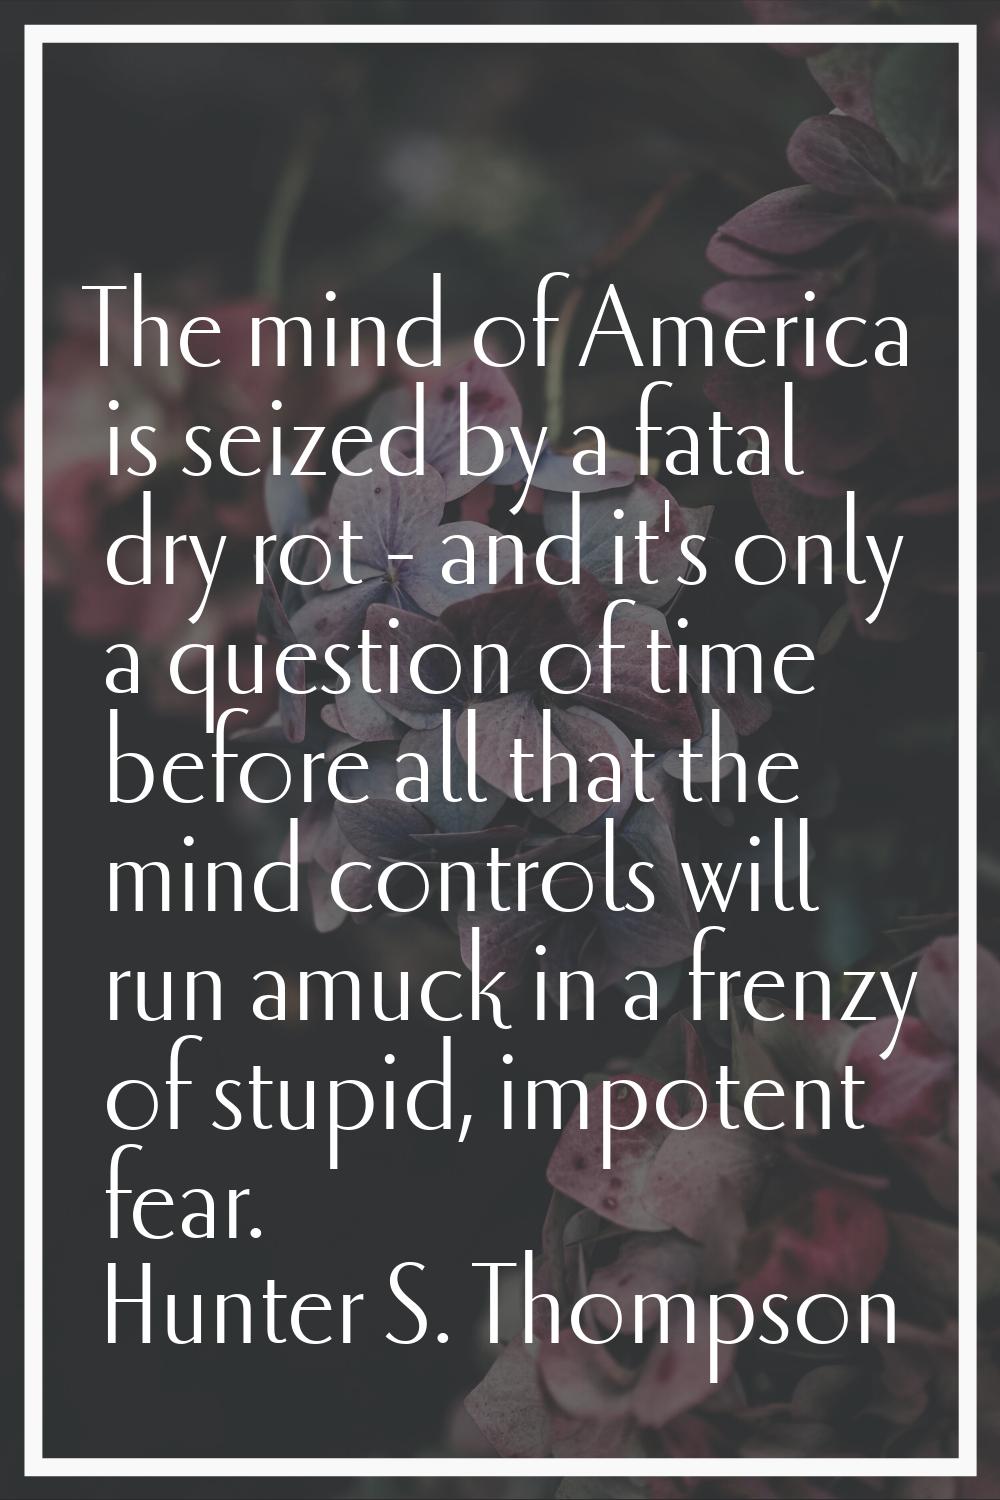 The mind of America is seized by a fatal dry rot - and it's only a question of time before all that